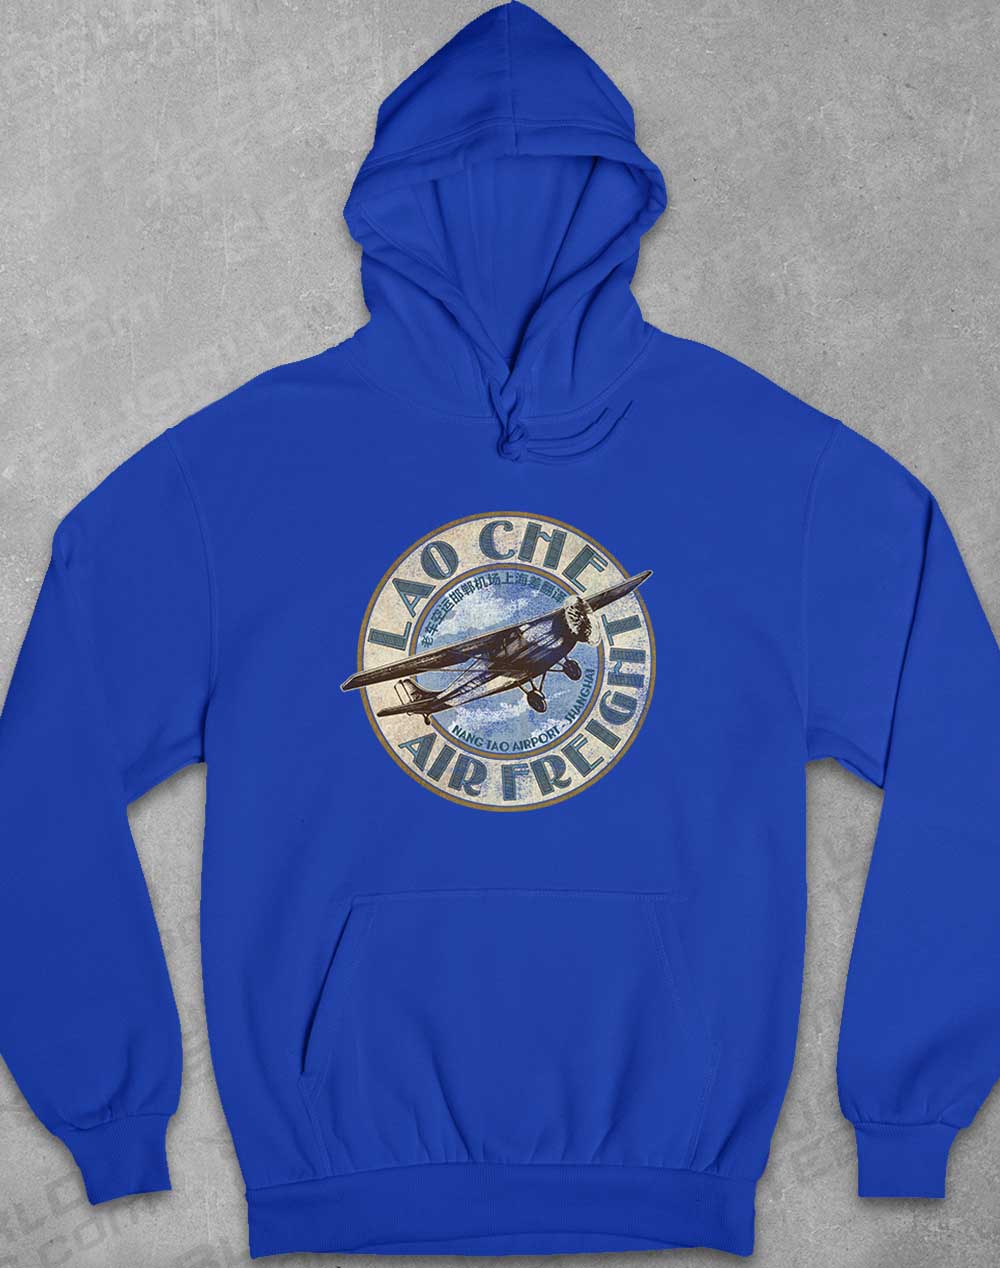 Royal Blue - Lao Che Air Freight Hoodie